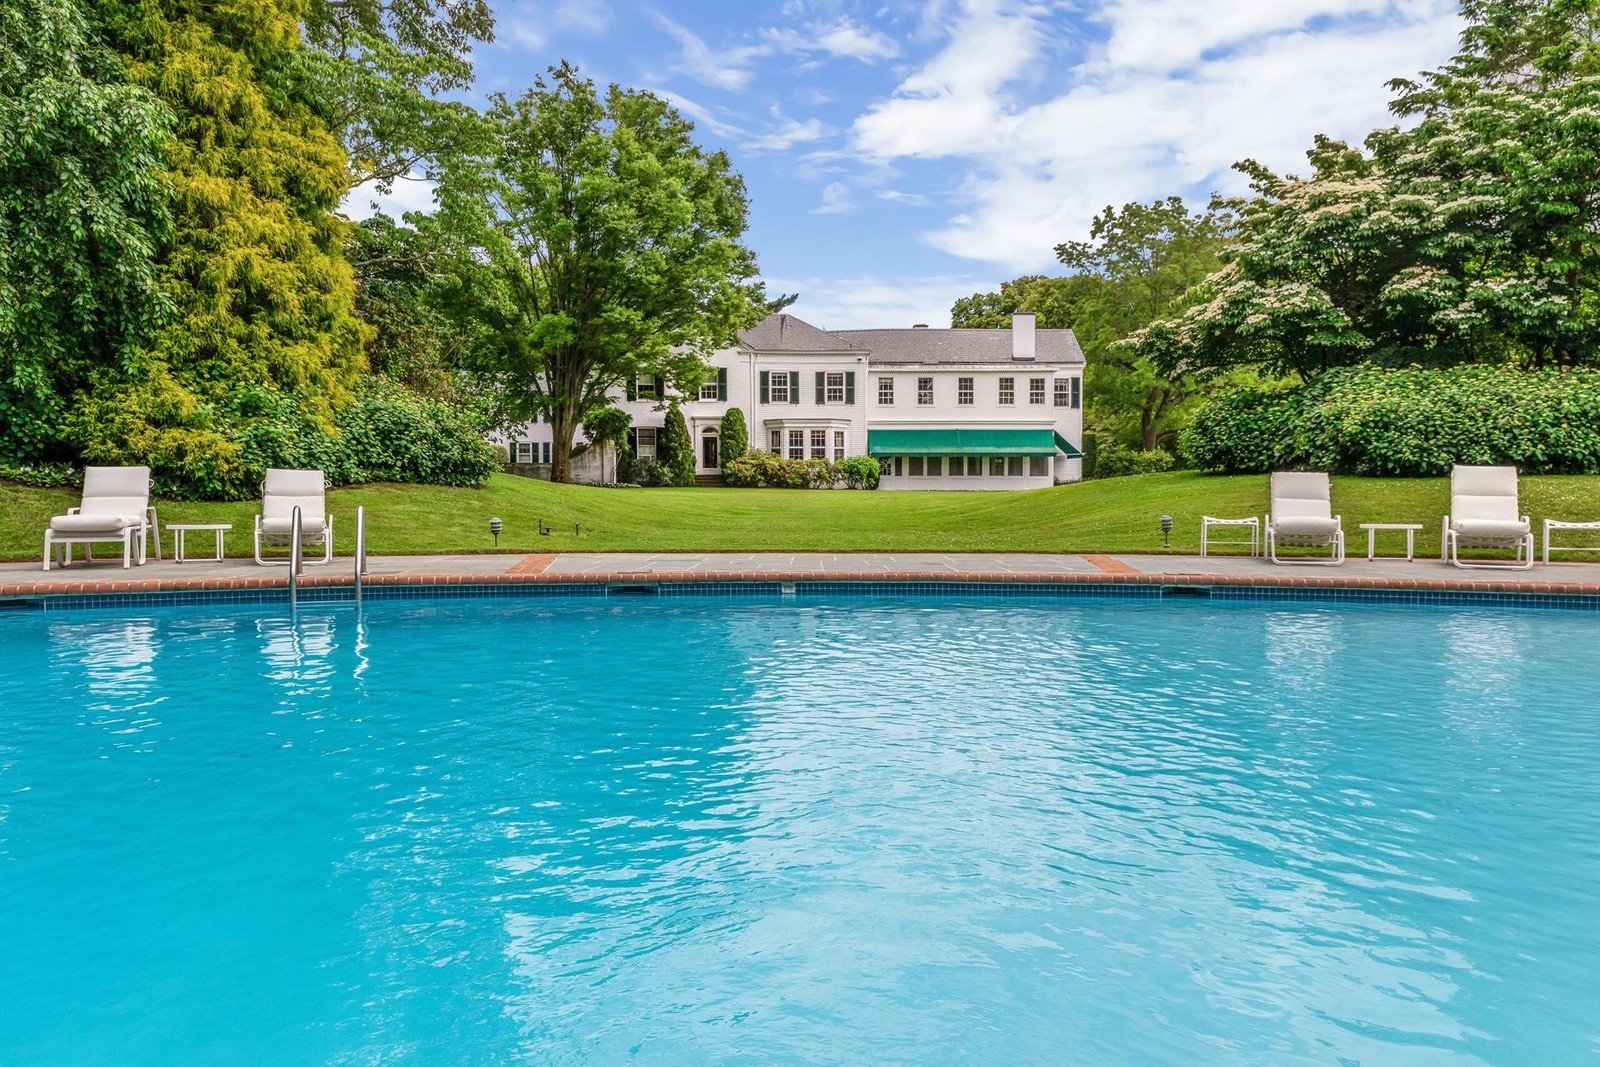 Francis York Gold Coast Waterfront Estate in Locust Valley, NY 27.jpeg